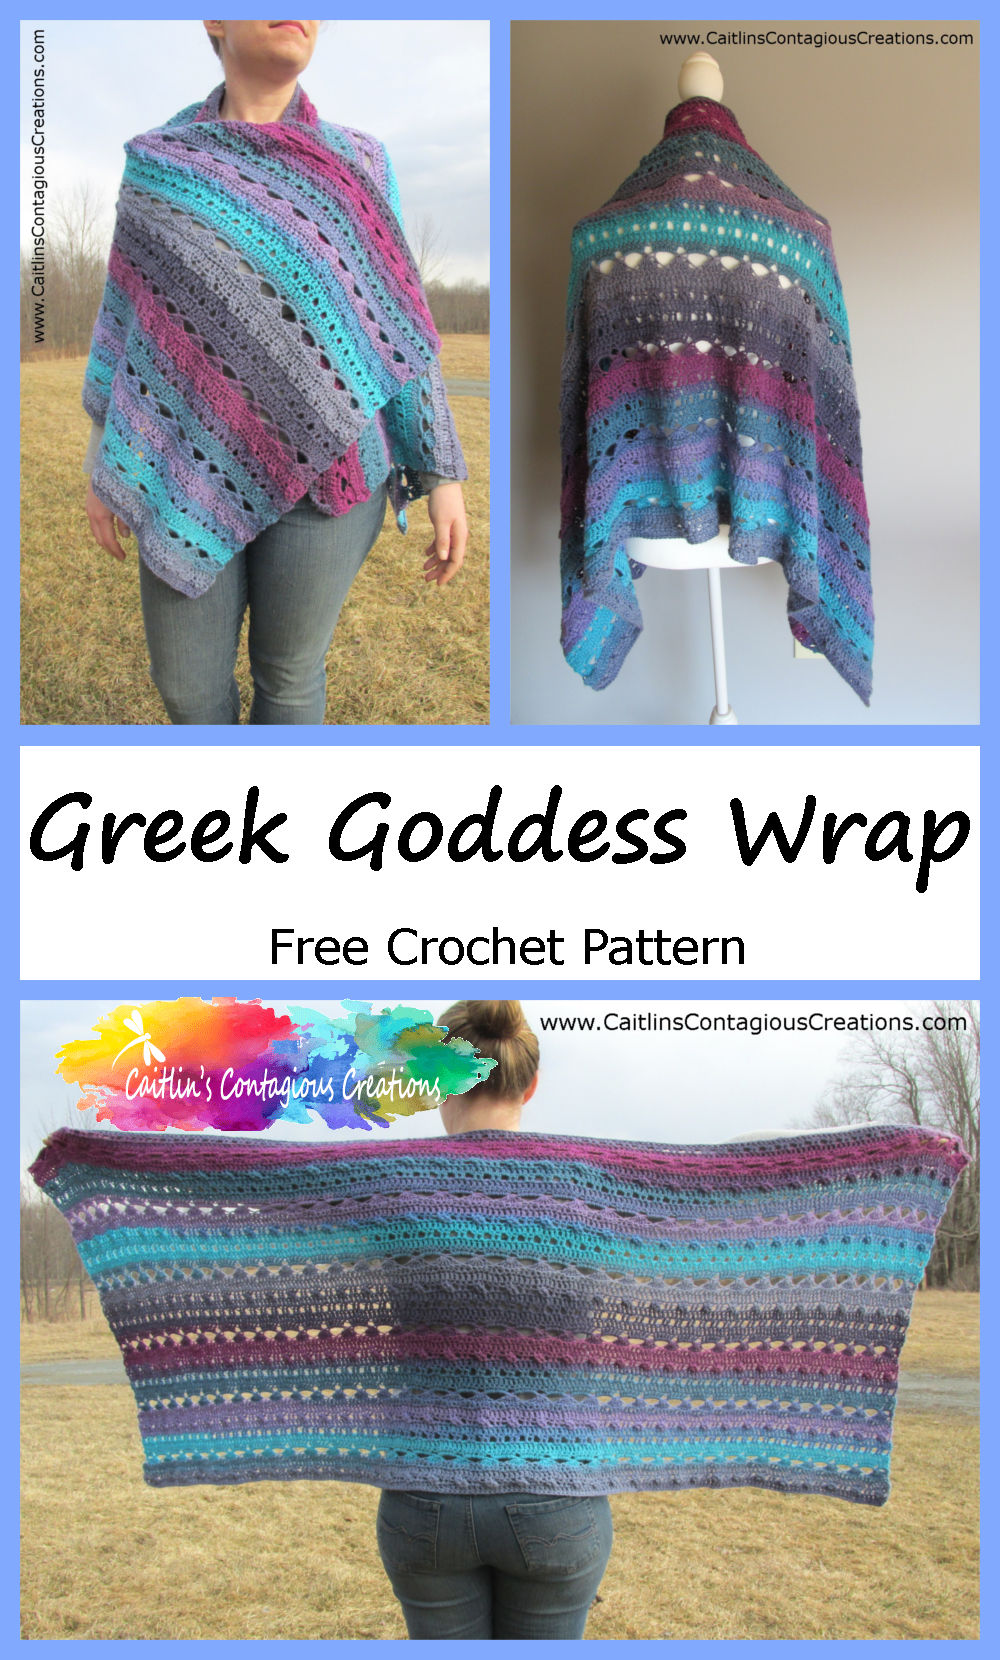 Easy Greek Goddess Shawl Crochet Pattern from Caitlin's Contagious Creations. A free crochet design for a rectangle prayer wrap includes written directions and step by step photos. Make your wrap now! #FreeWrapCrochetPattern #ShawlCrochetDesign #FunCrochetDesign